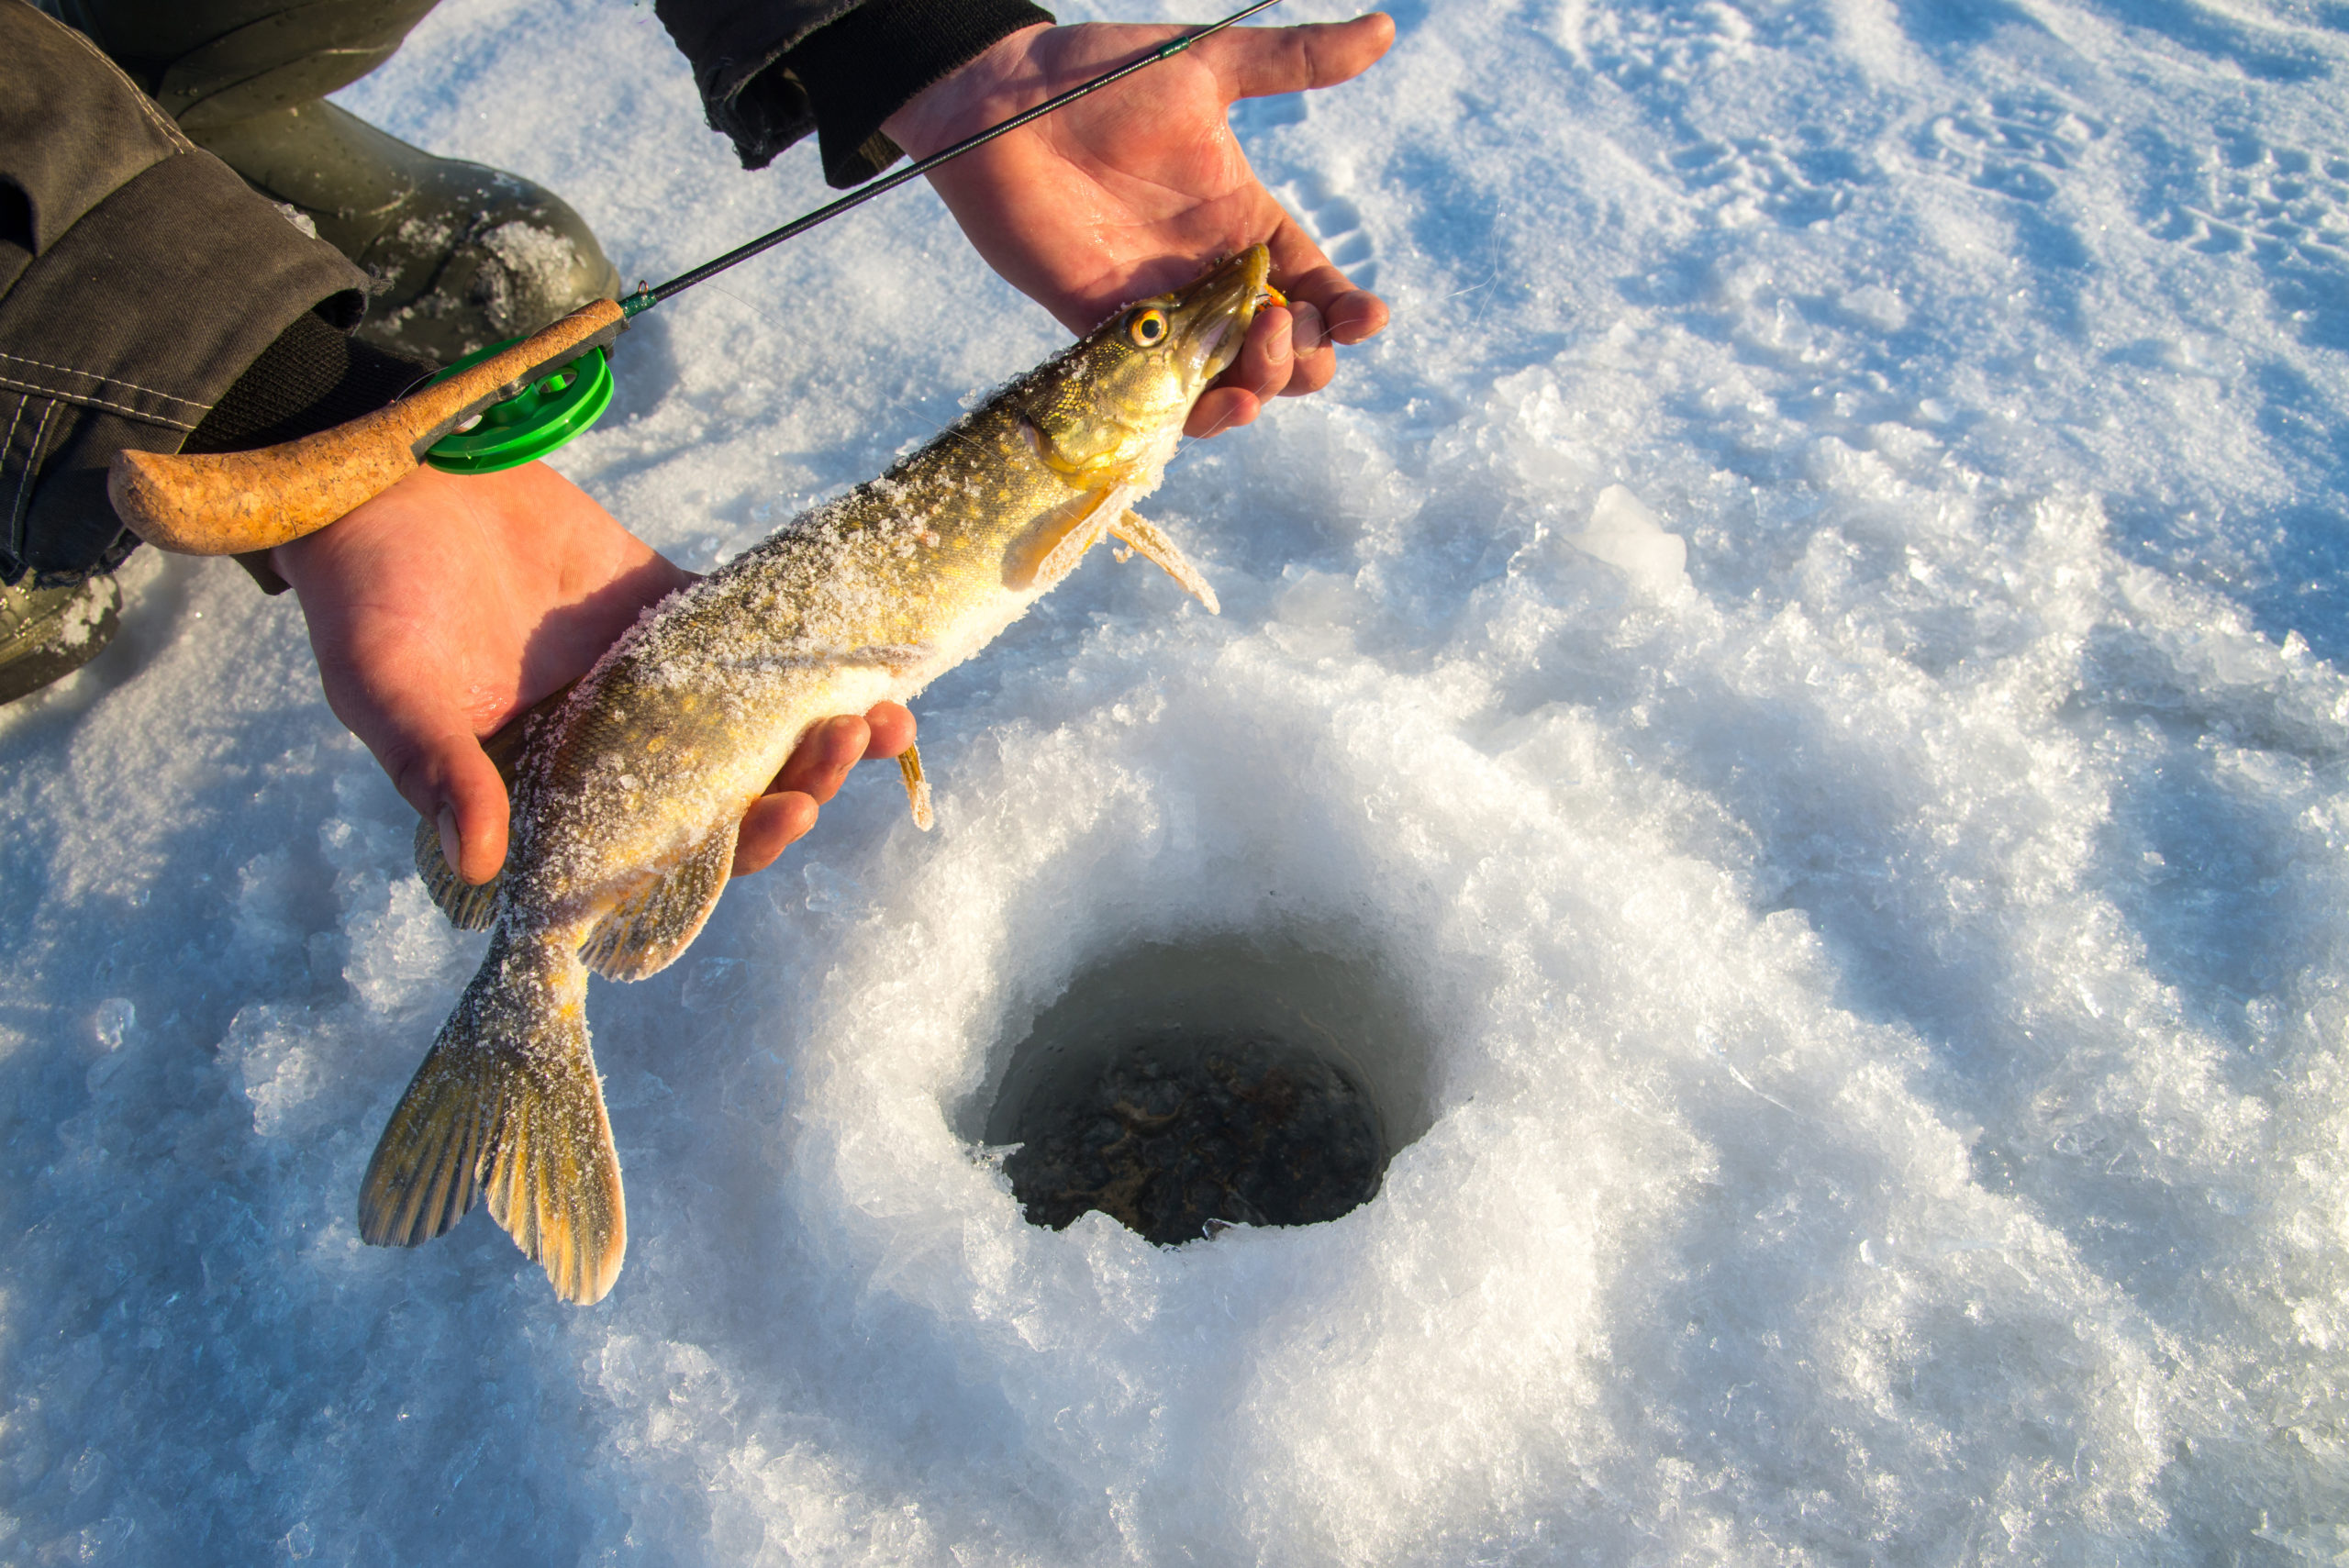 A fish caught during ice fishing.